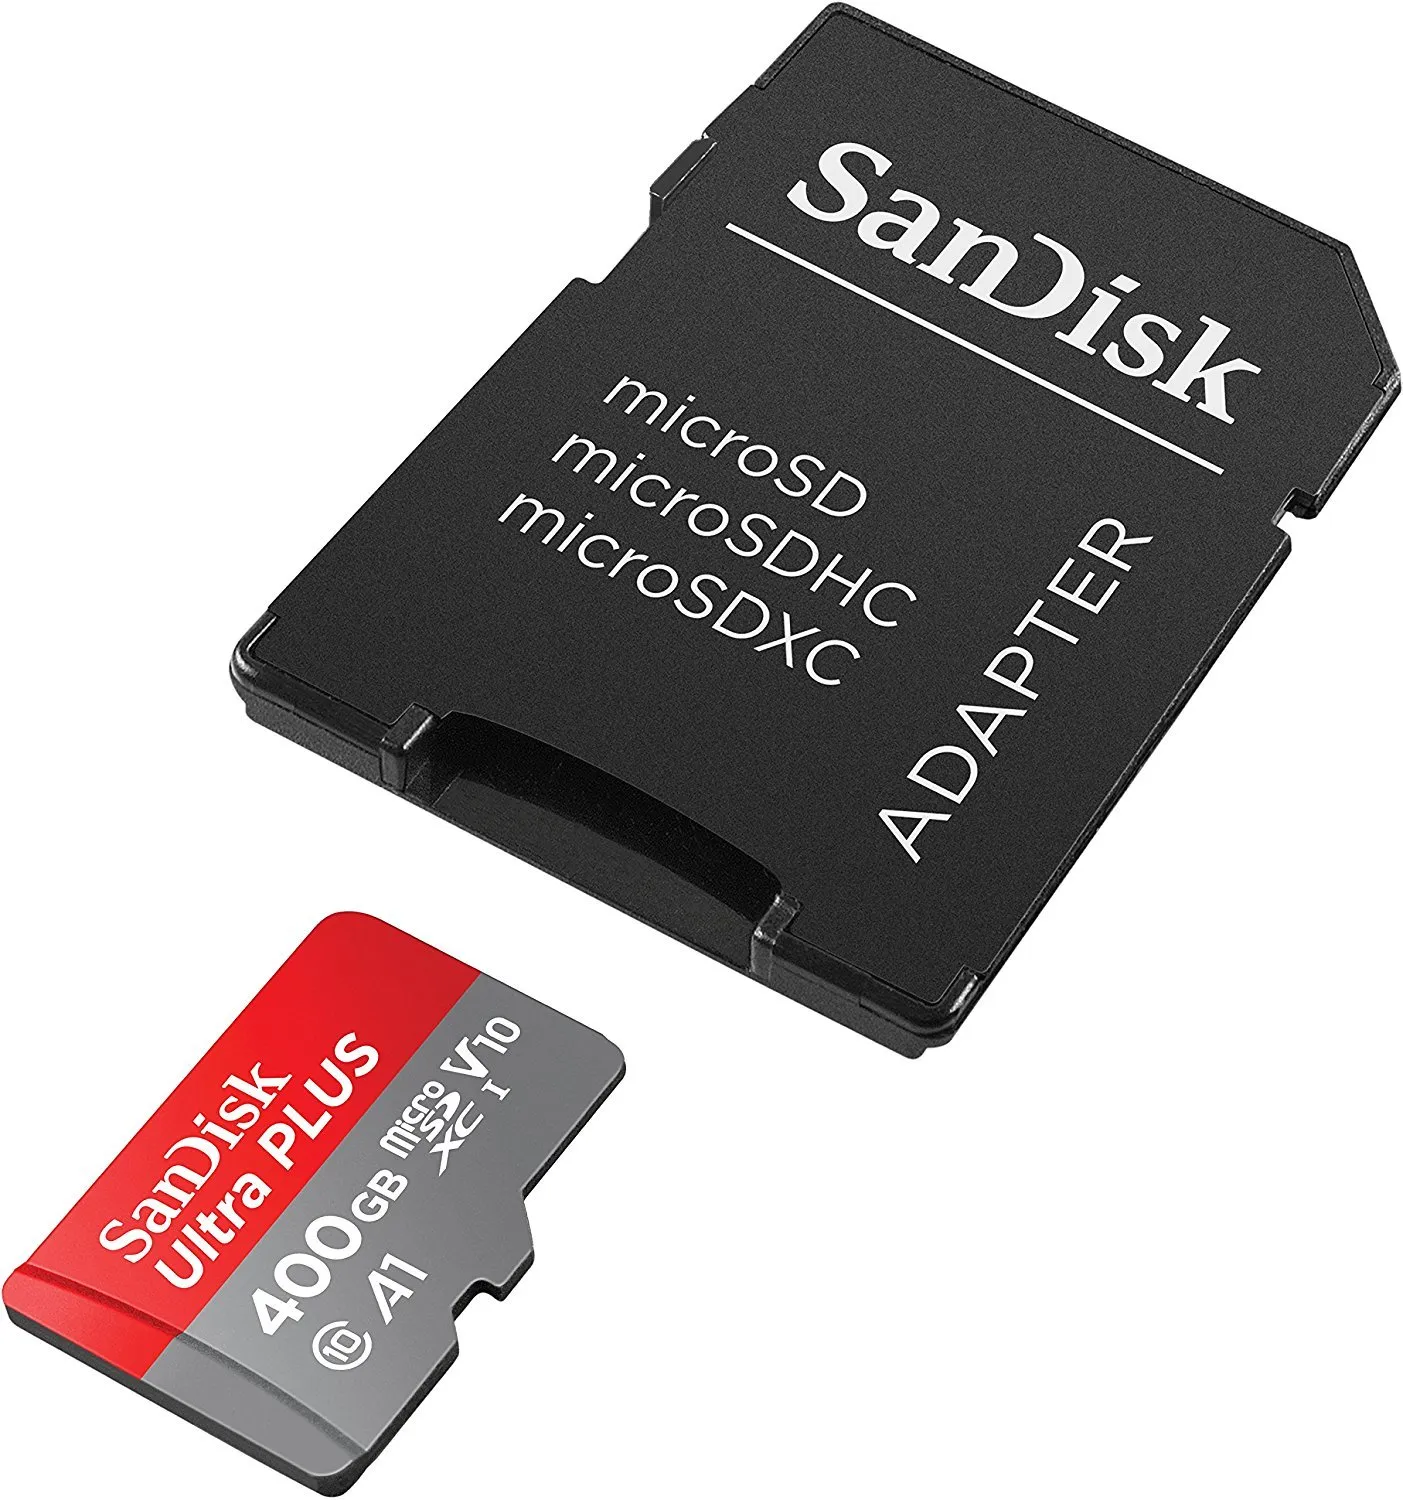 SanDisk releases 400GB Micro SD card, will work on Nintendo Switch –  Destructoid